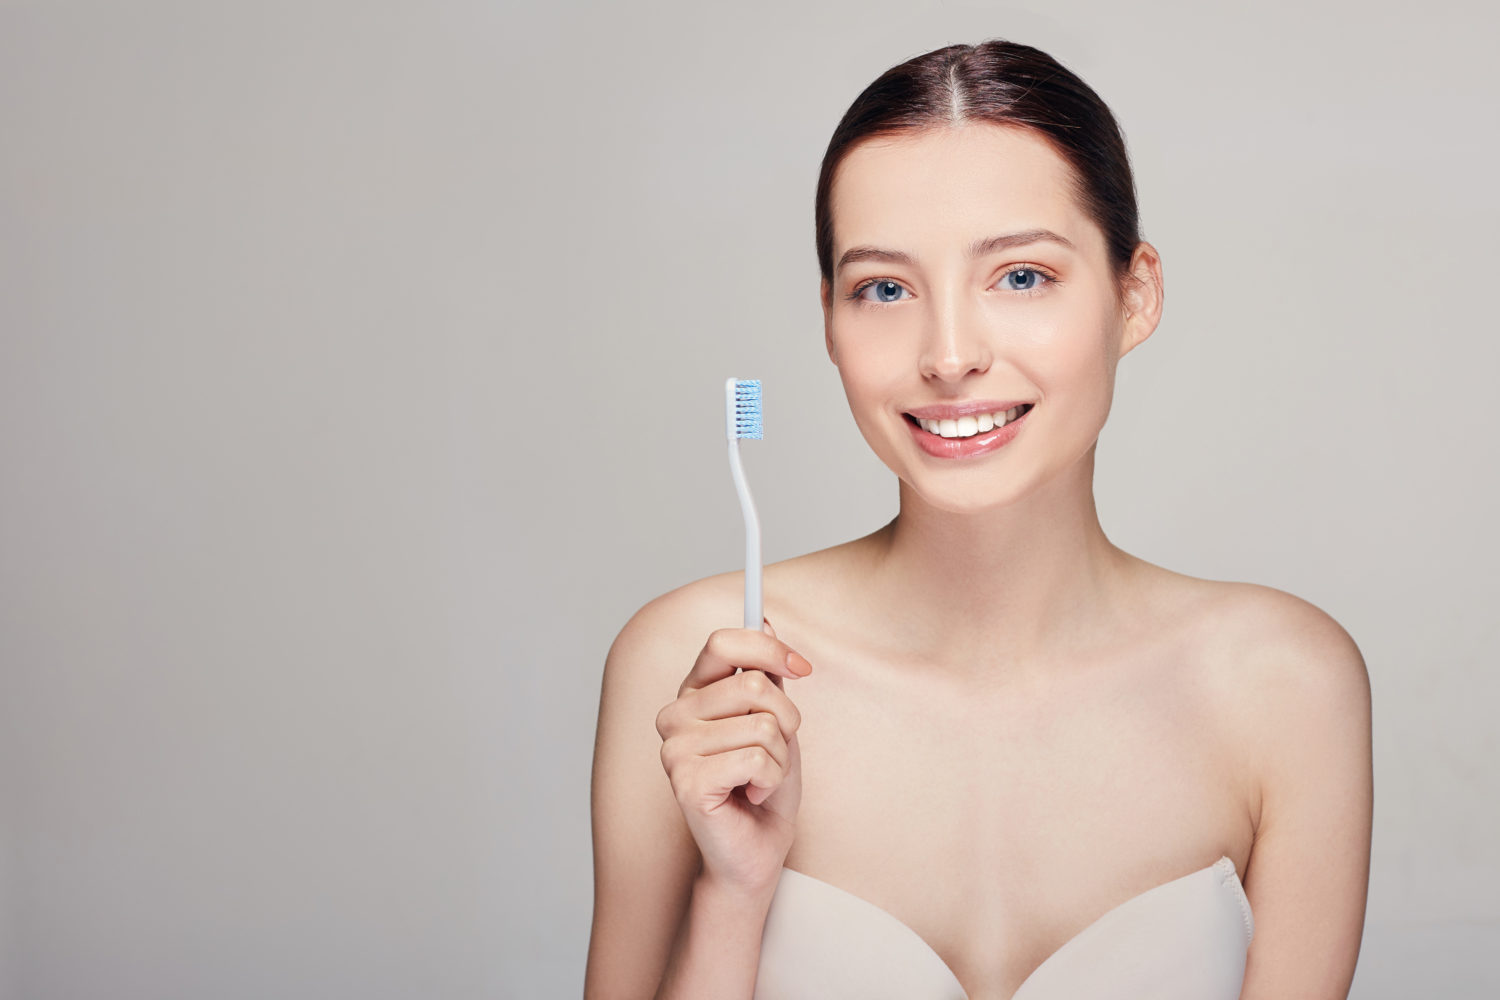 the right way to brush your teeth and the importance of taking care of your hygiene oral